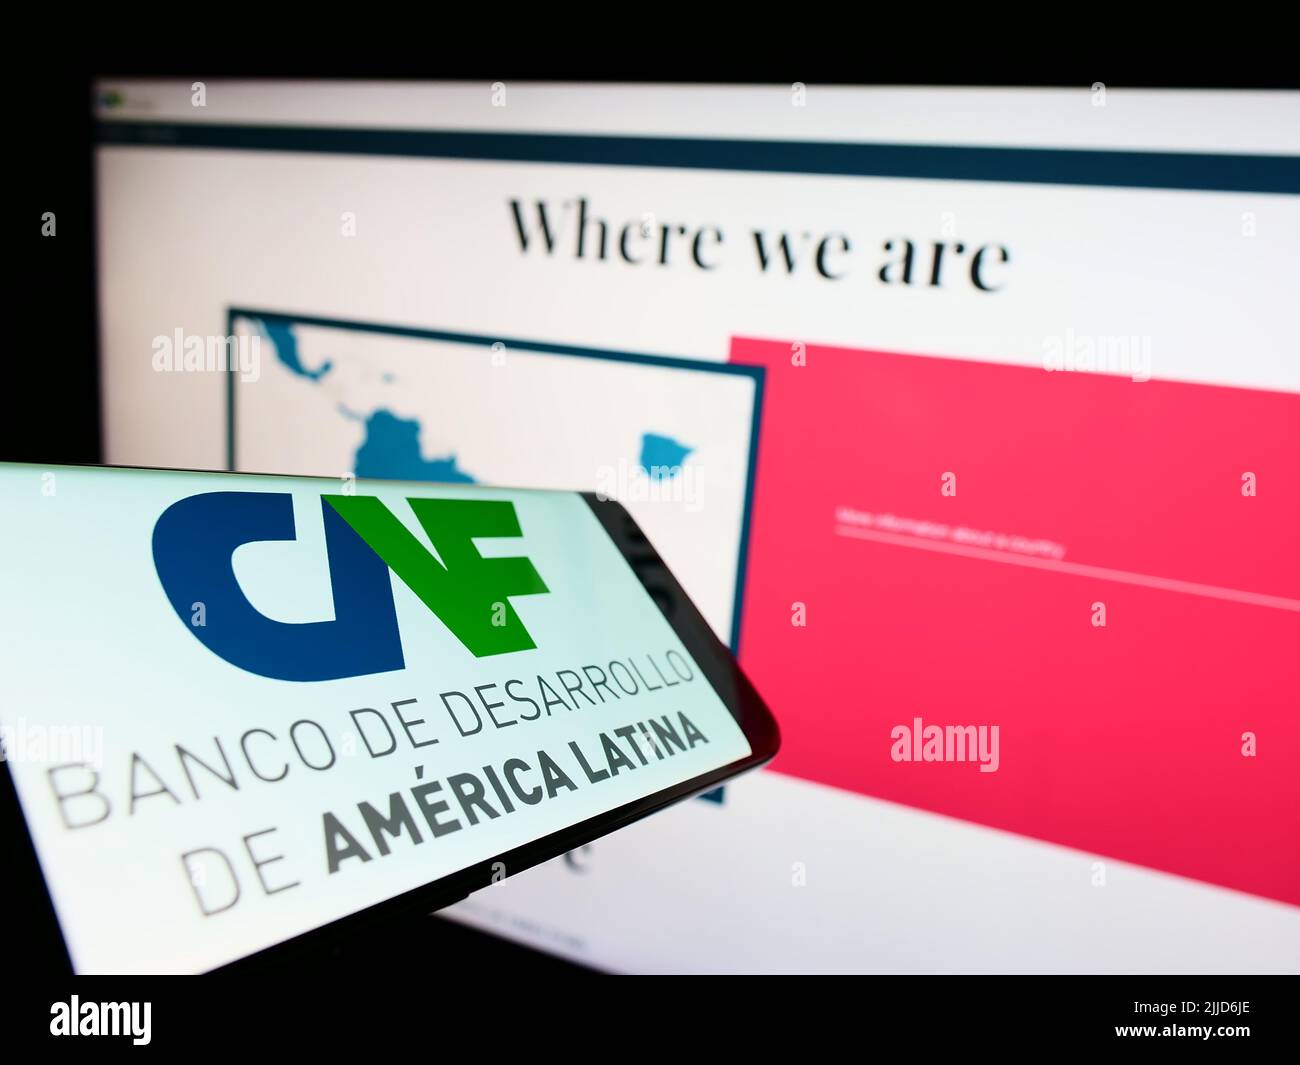 Cellphone with logo of Corporacion Andina de Fomento (CAF) on screen in front of business website. Focus on center-right of phone display. Stock Photo